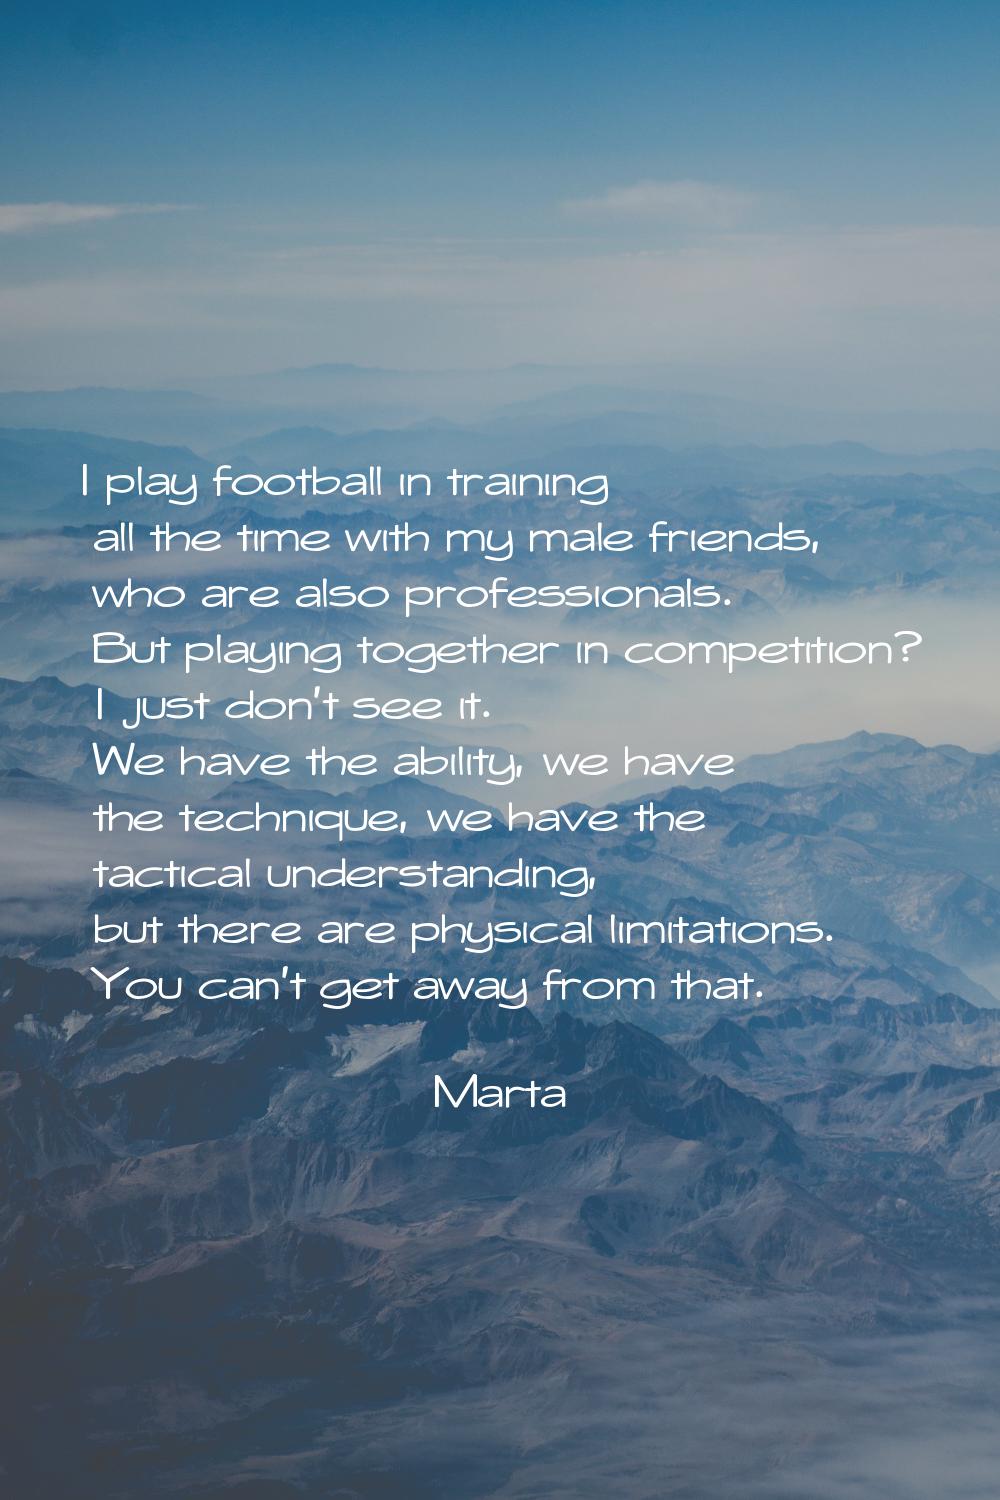 I play football in training all the time with my male friends, who are also professionals. But play